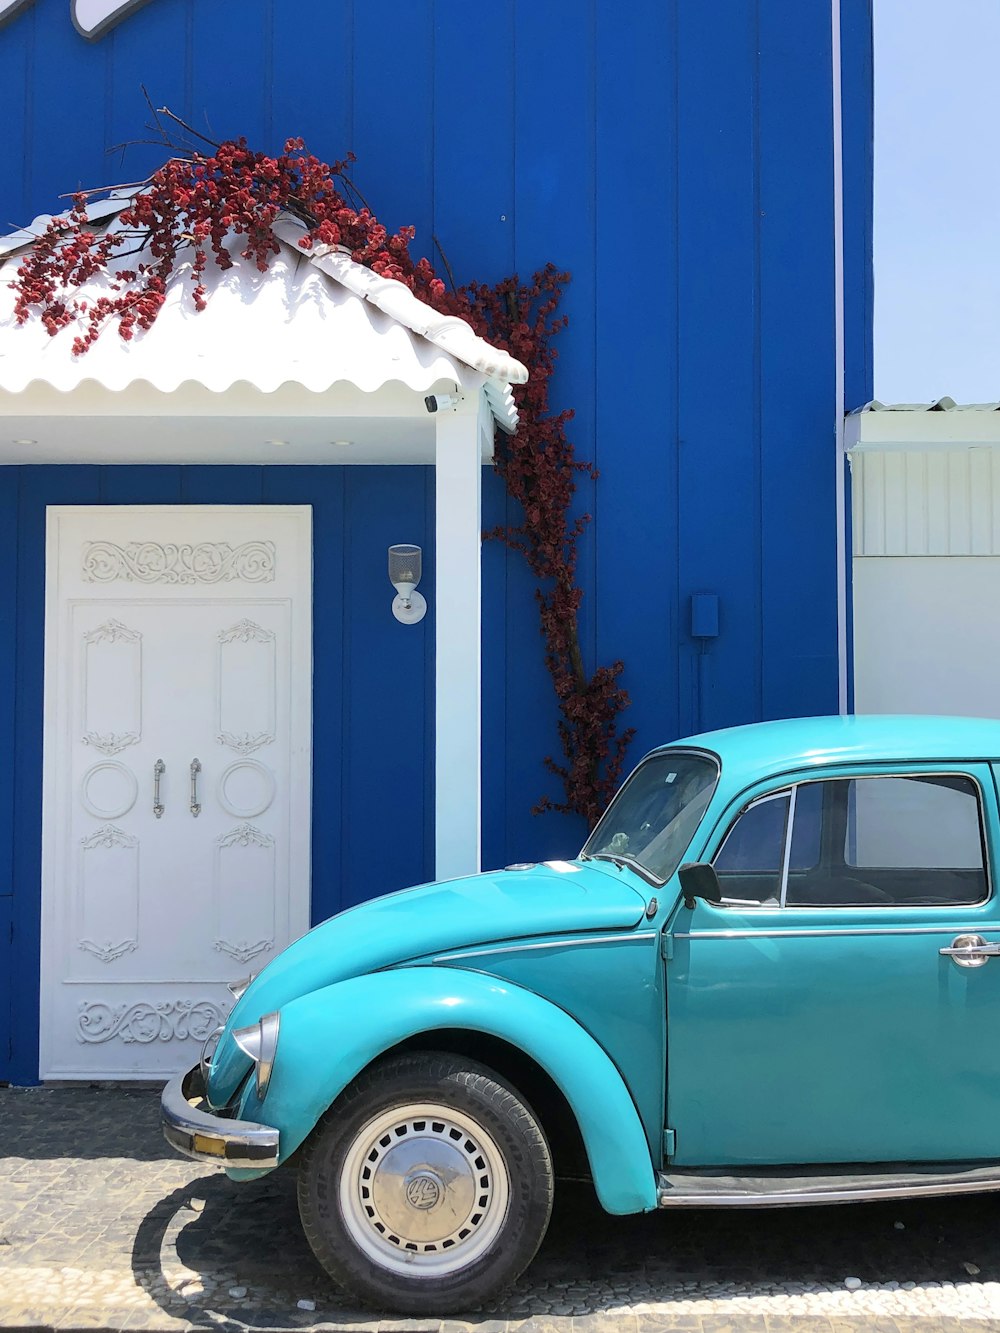 a blue car parked in front of a blue building